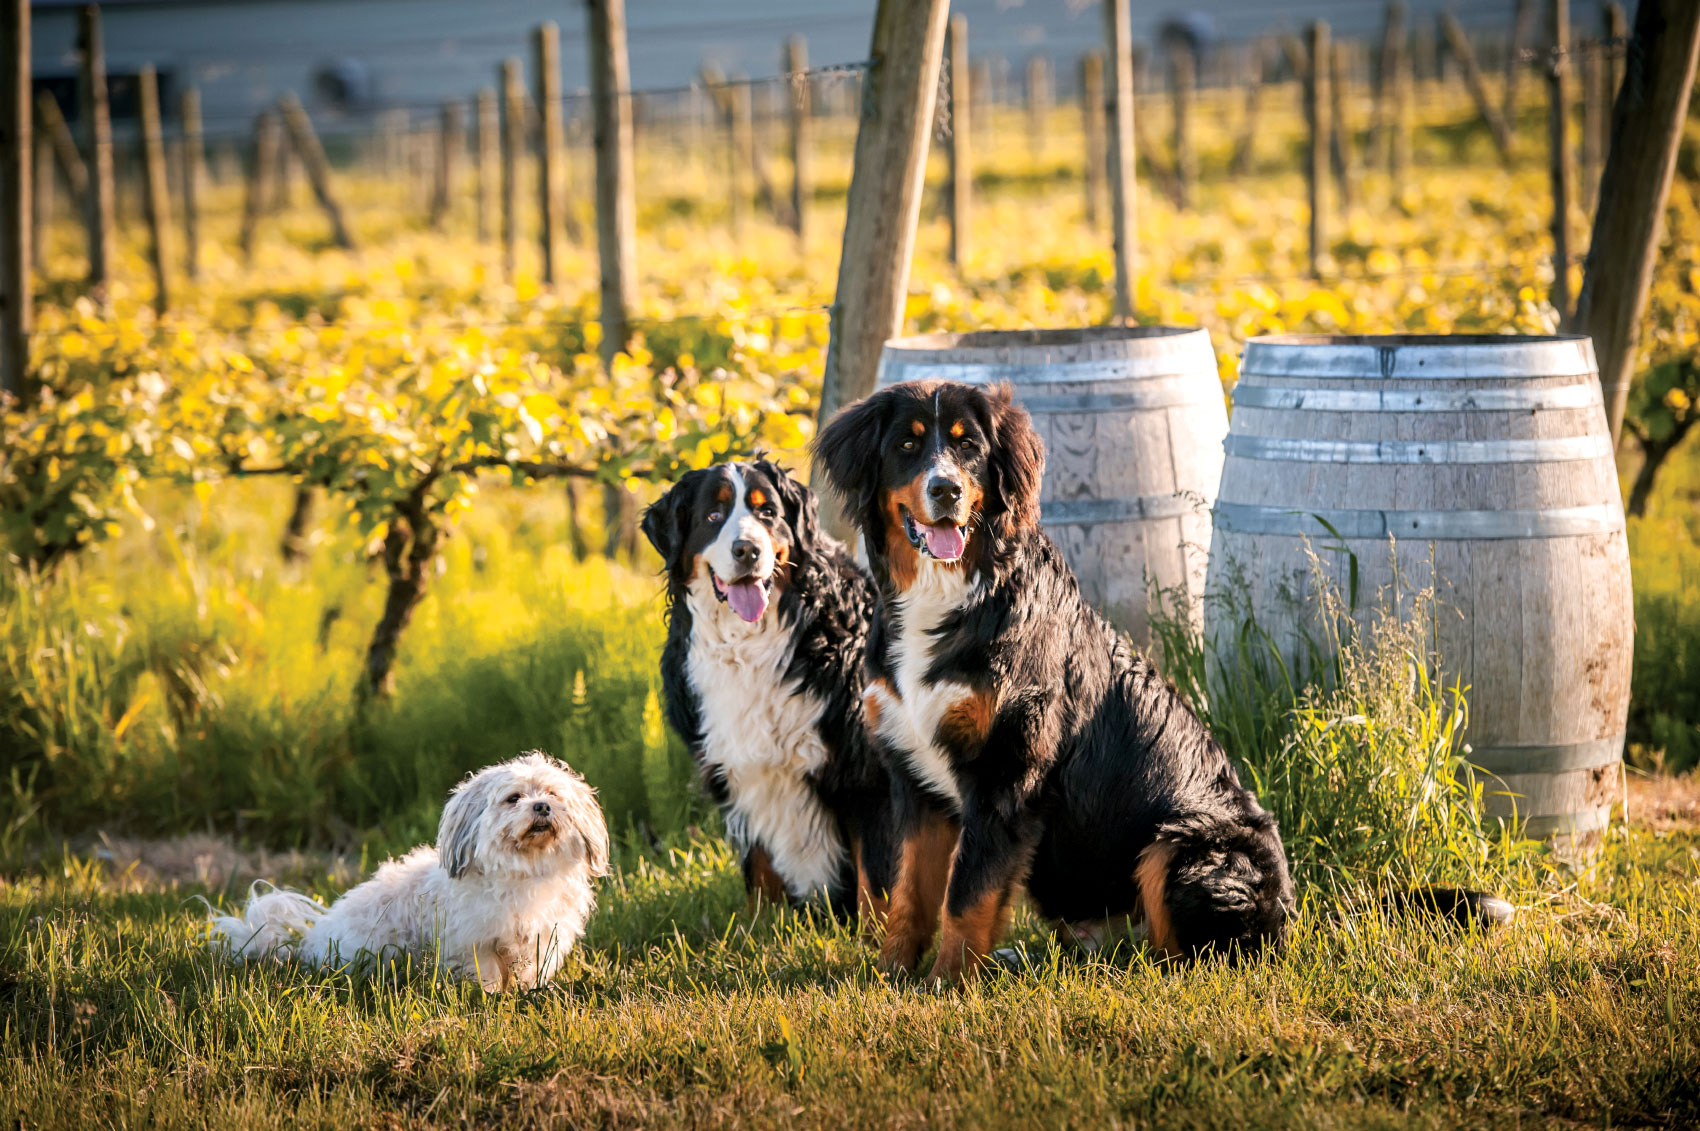 Autumn, Maddy and Dempsey with vineyard and wine barrels in background